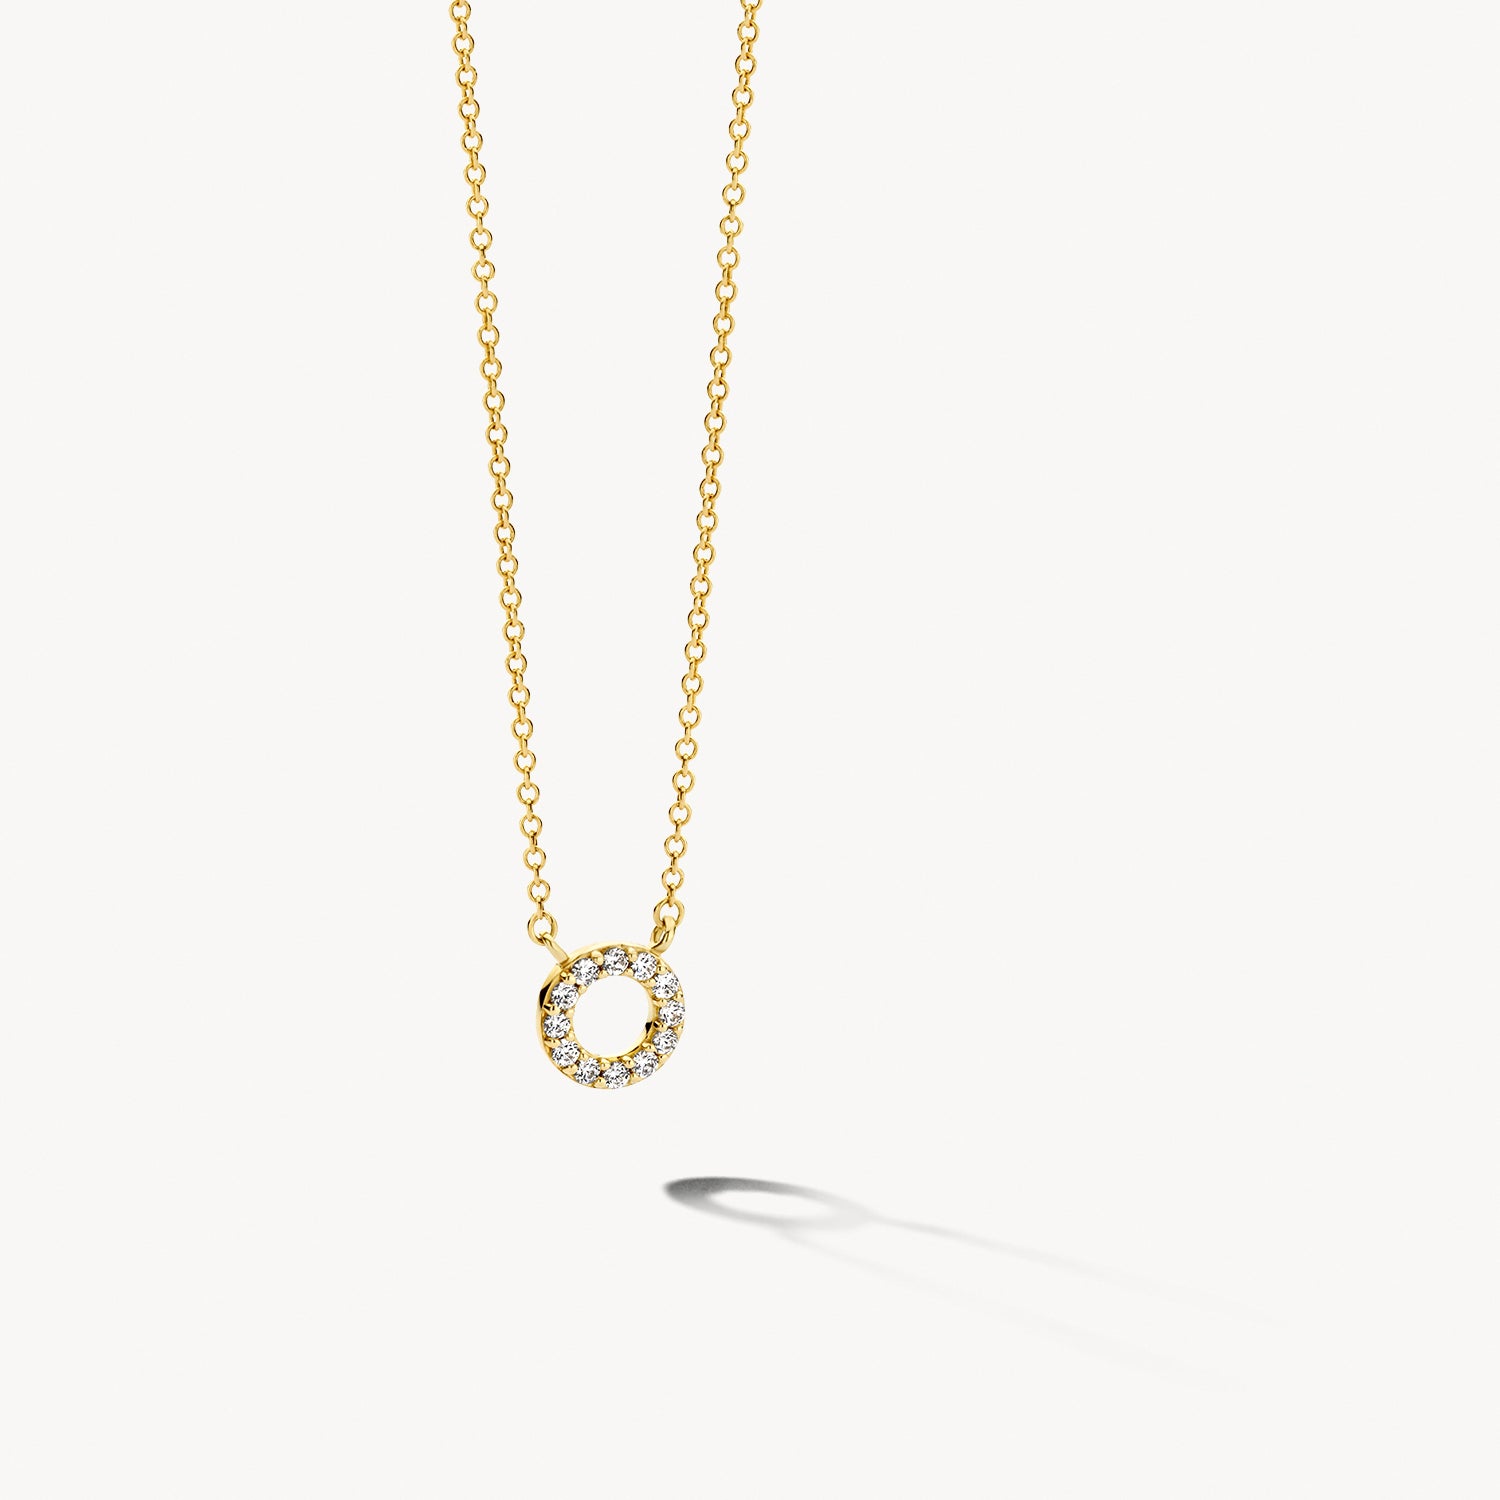 Necklace 3125YZI - 14k Yellow Gold with Zirconia